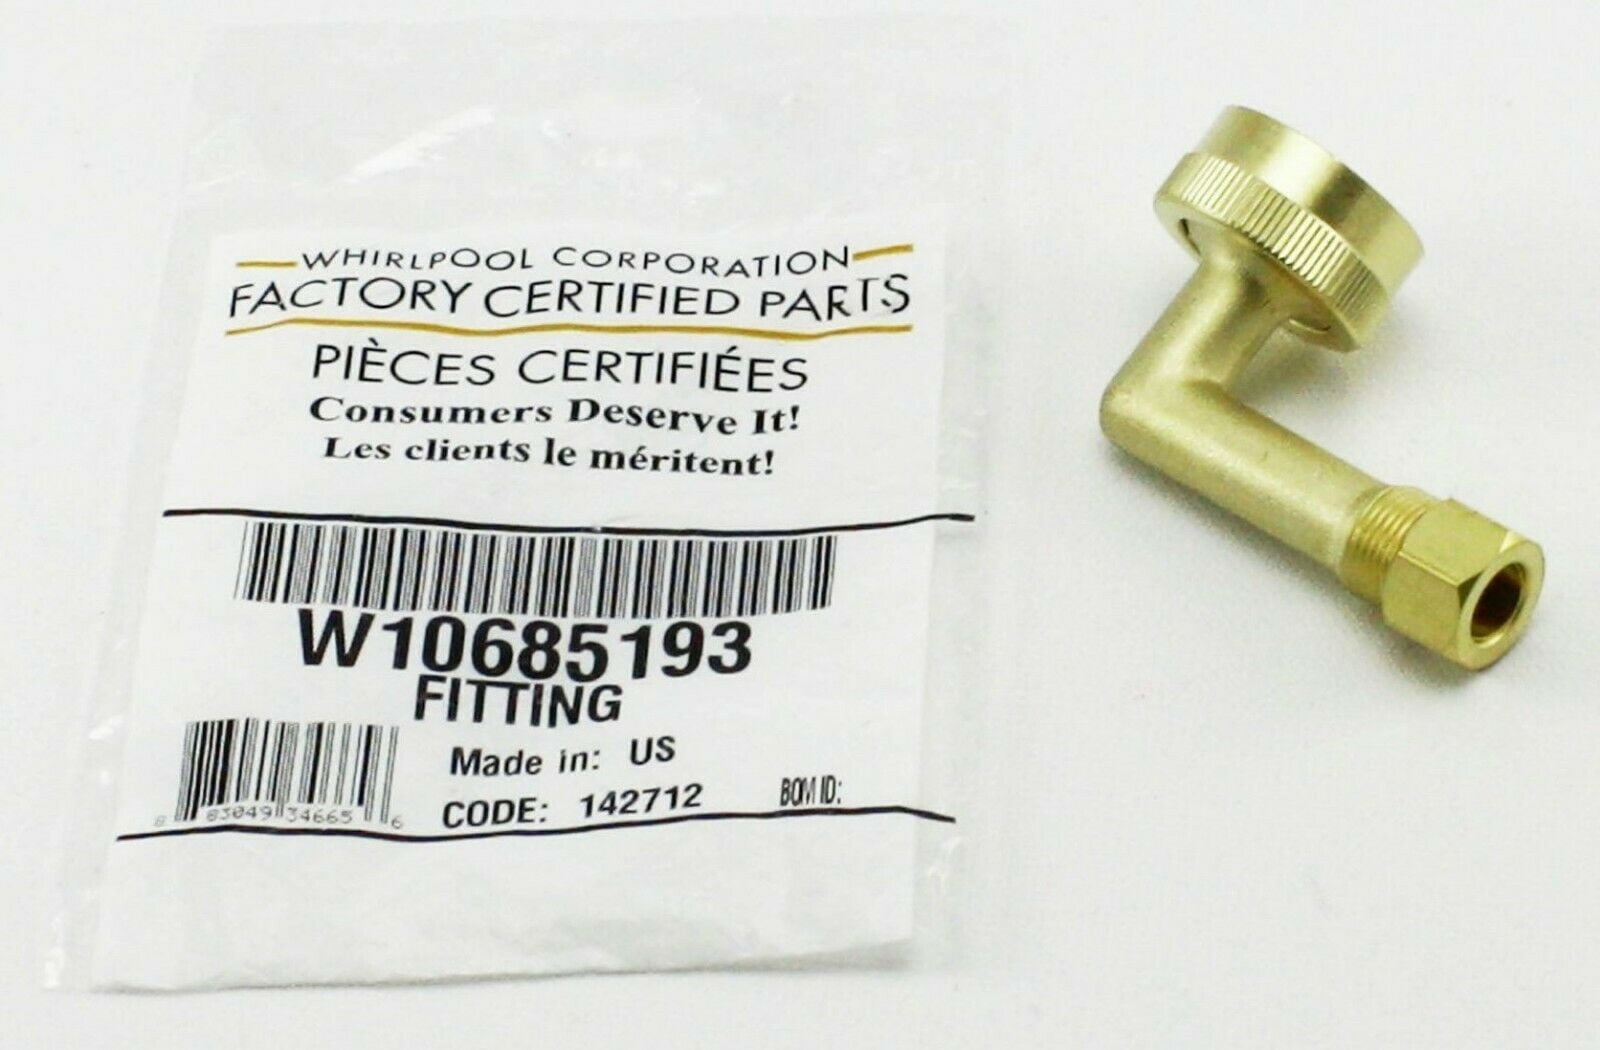 W10685193 Whirlpool Fitting NON-OEM W10685193 ER34FHT W10273460 